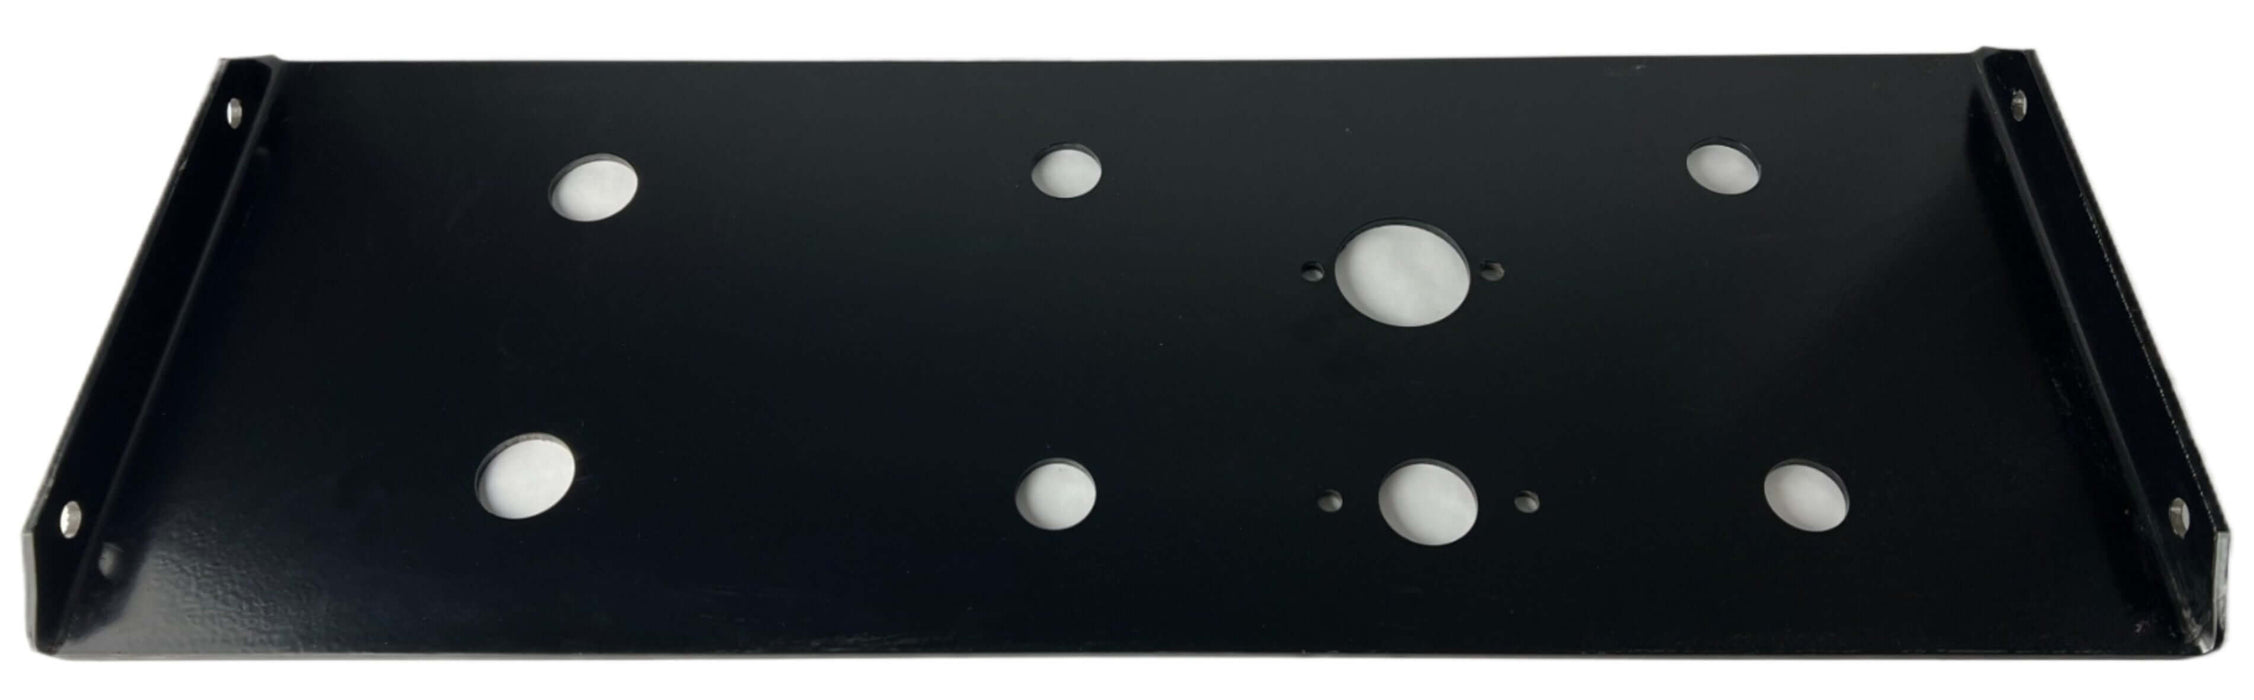 The bottom side of a rectangular black airline plate with 8 holes to run semi truck airline connections to trailer